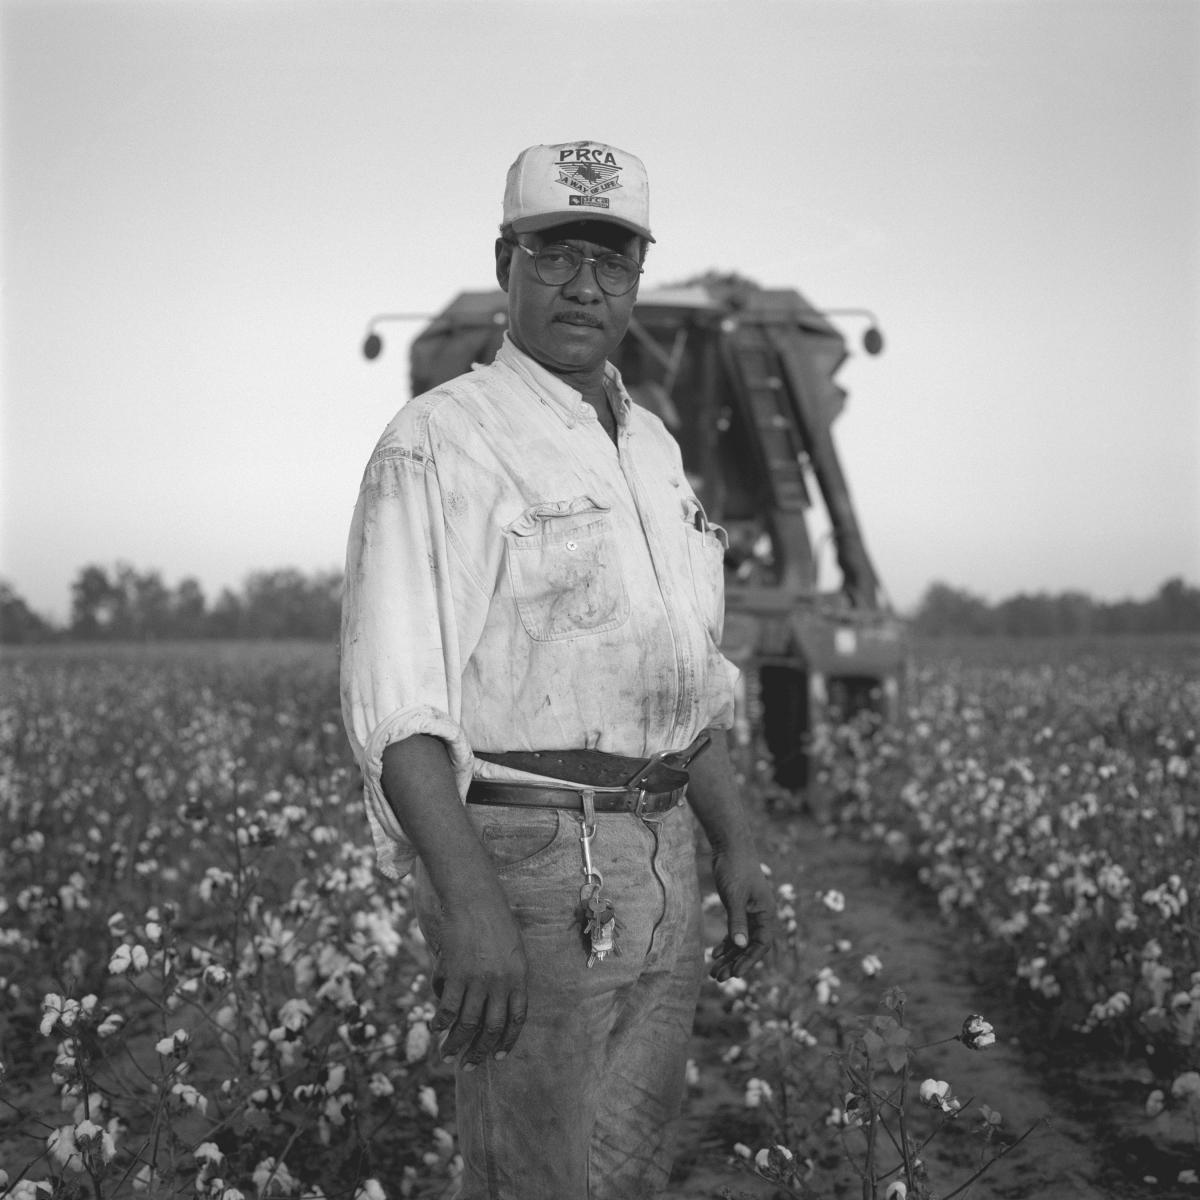 <p><center>Humphreys County, Mississippi:</center></p>
Edmond Clark is a third-generation cotton farmer. Clark's son has decided against taking over the farm, the nephew who currently assists him may eventually assume the responsibility  and keep the land productive. : Images : AMERICAN BLACK FARMERS PROJECT - John Ficara